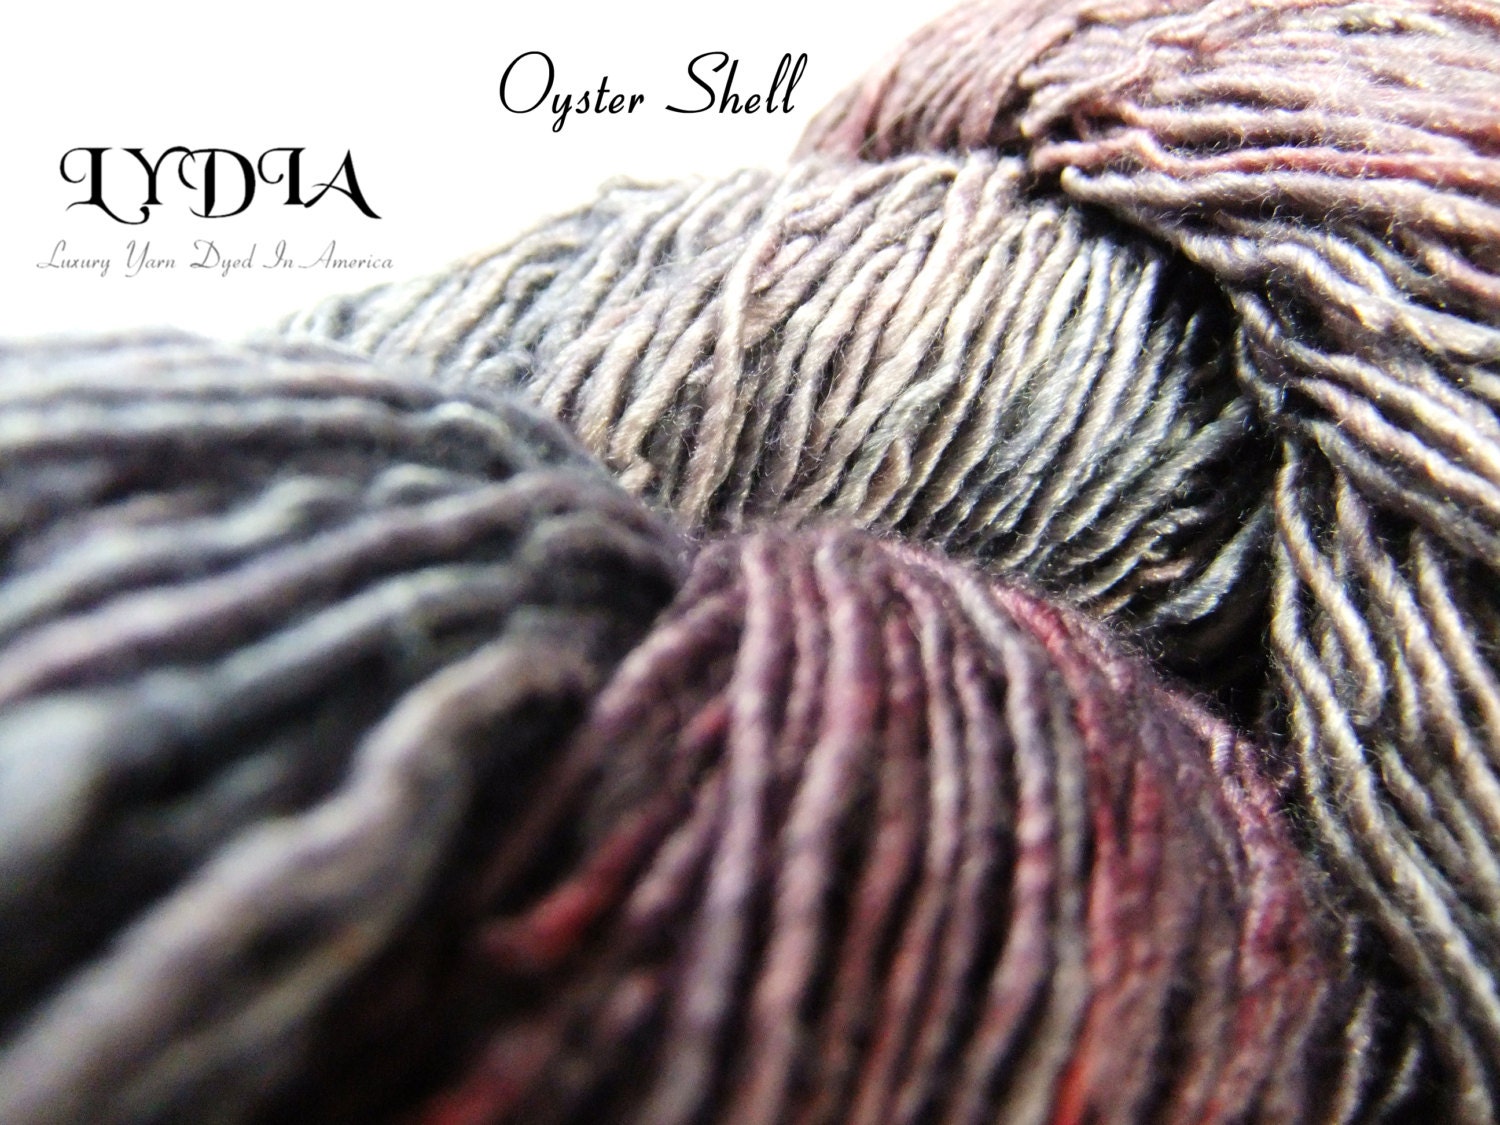 Delight: Merino/Silk Hand Dyed Yarn by LYDIA in Oyster Shell